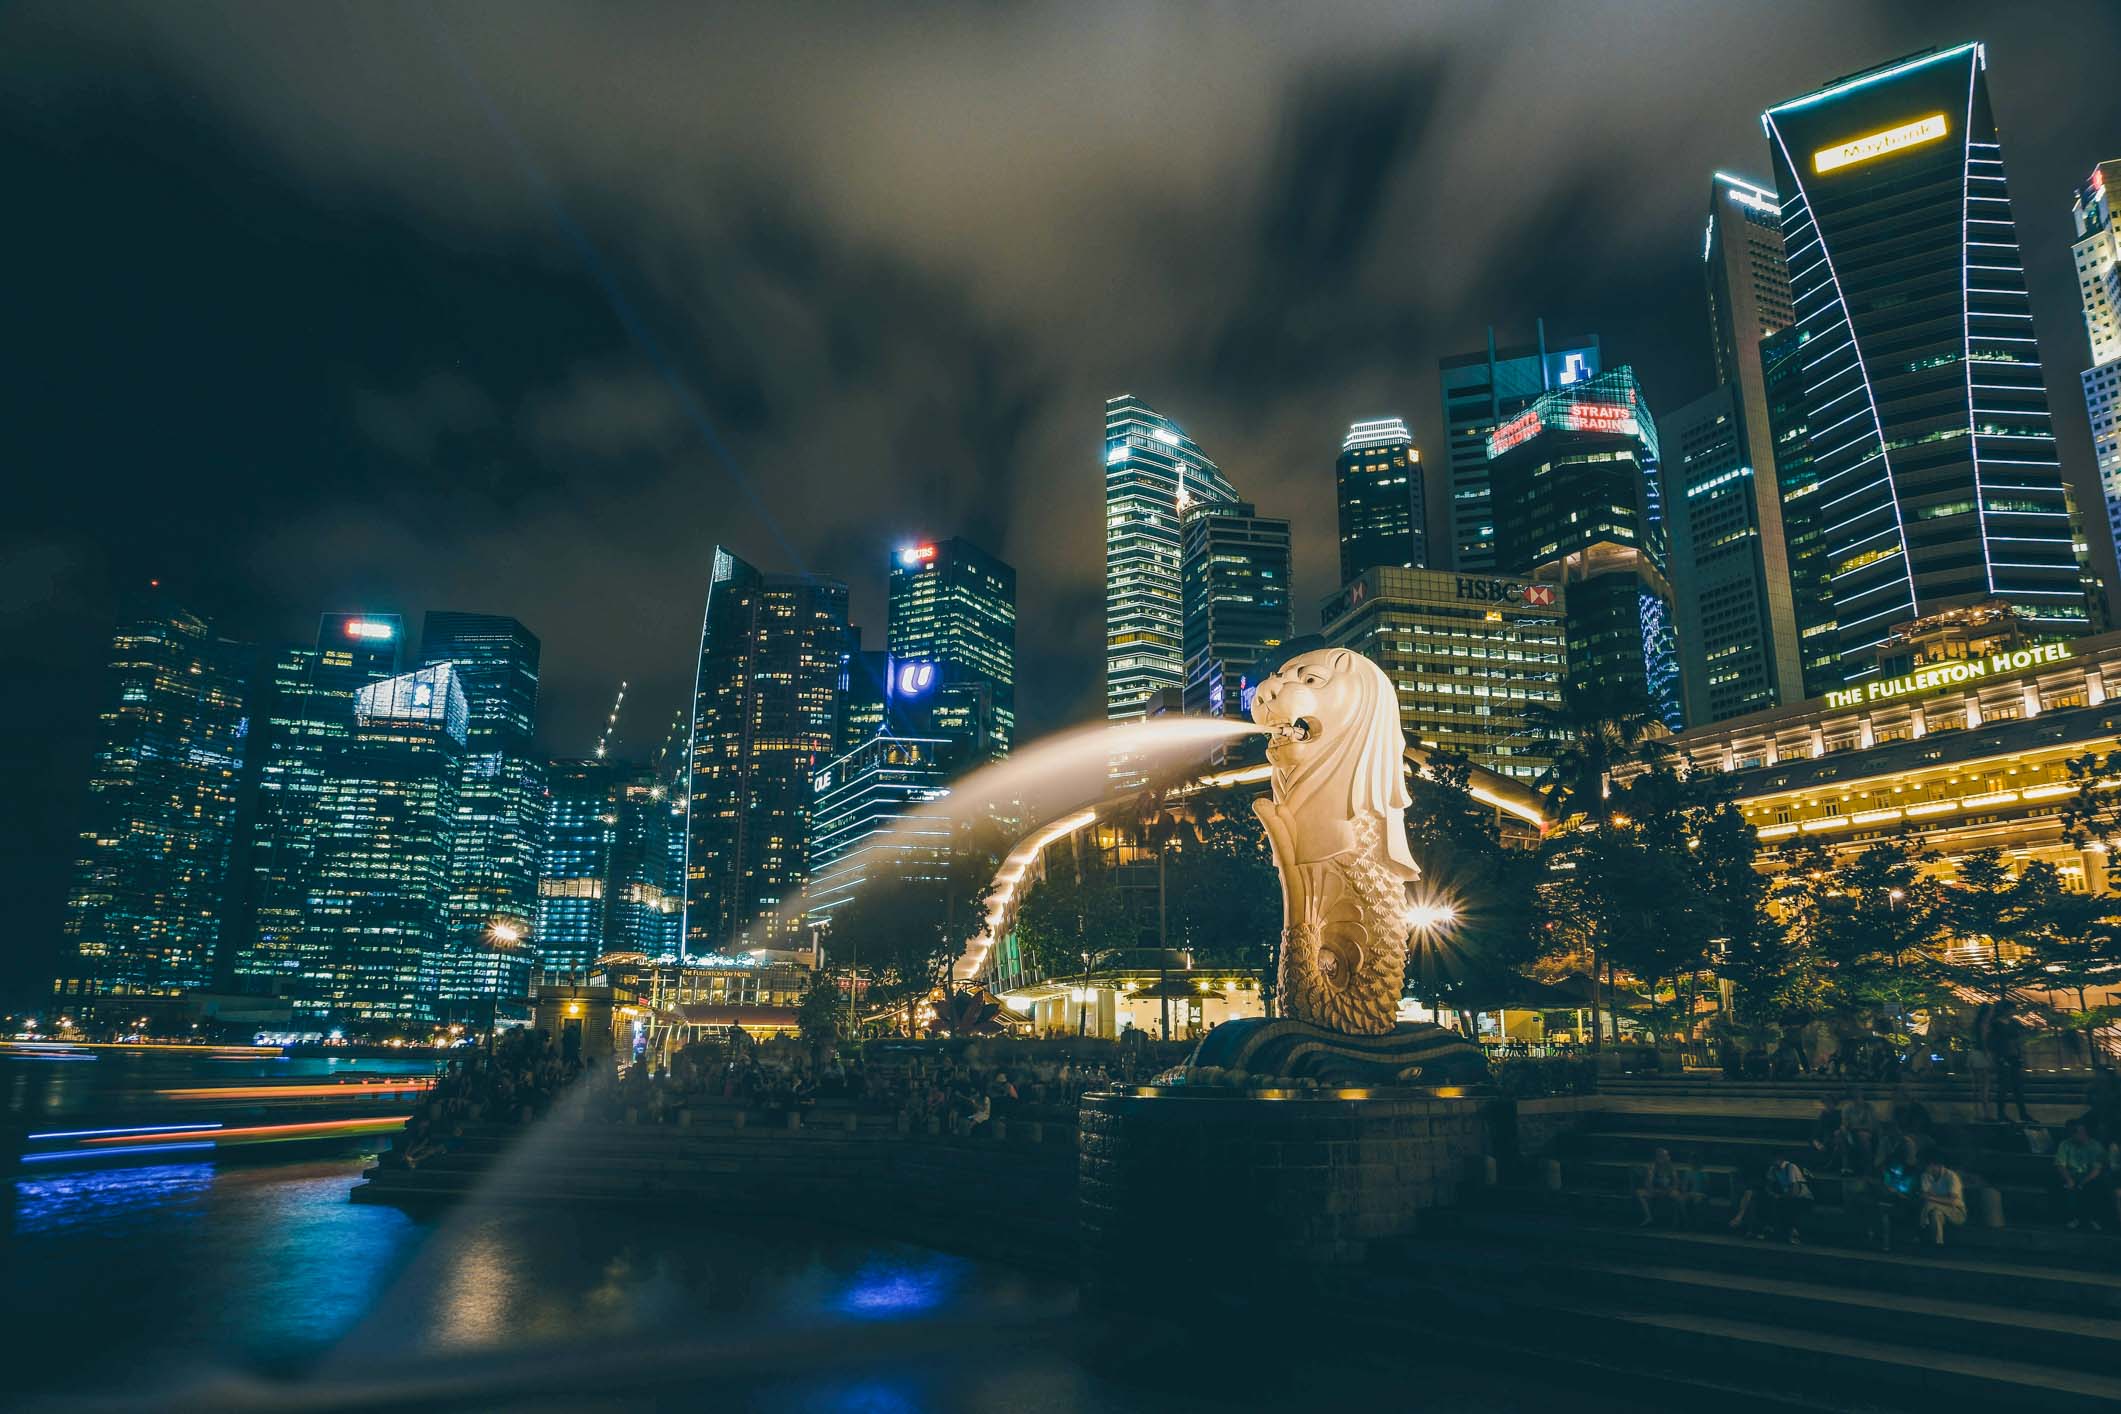 Visit Singapore - All You Need to Know Before Your Trip